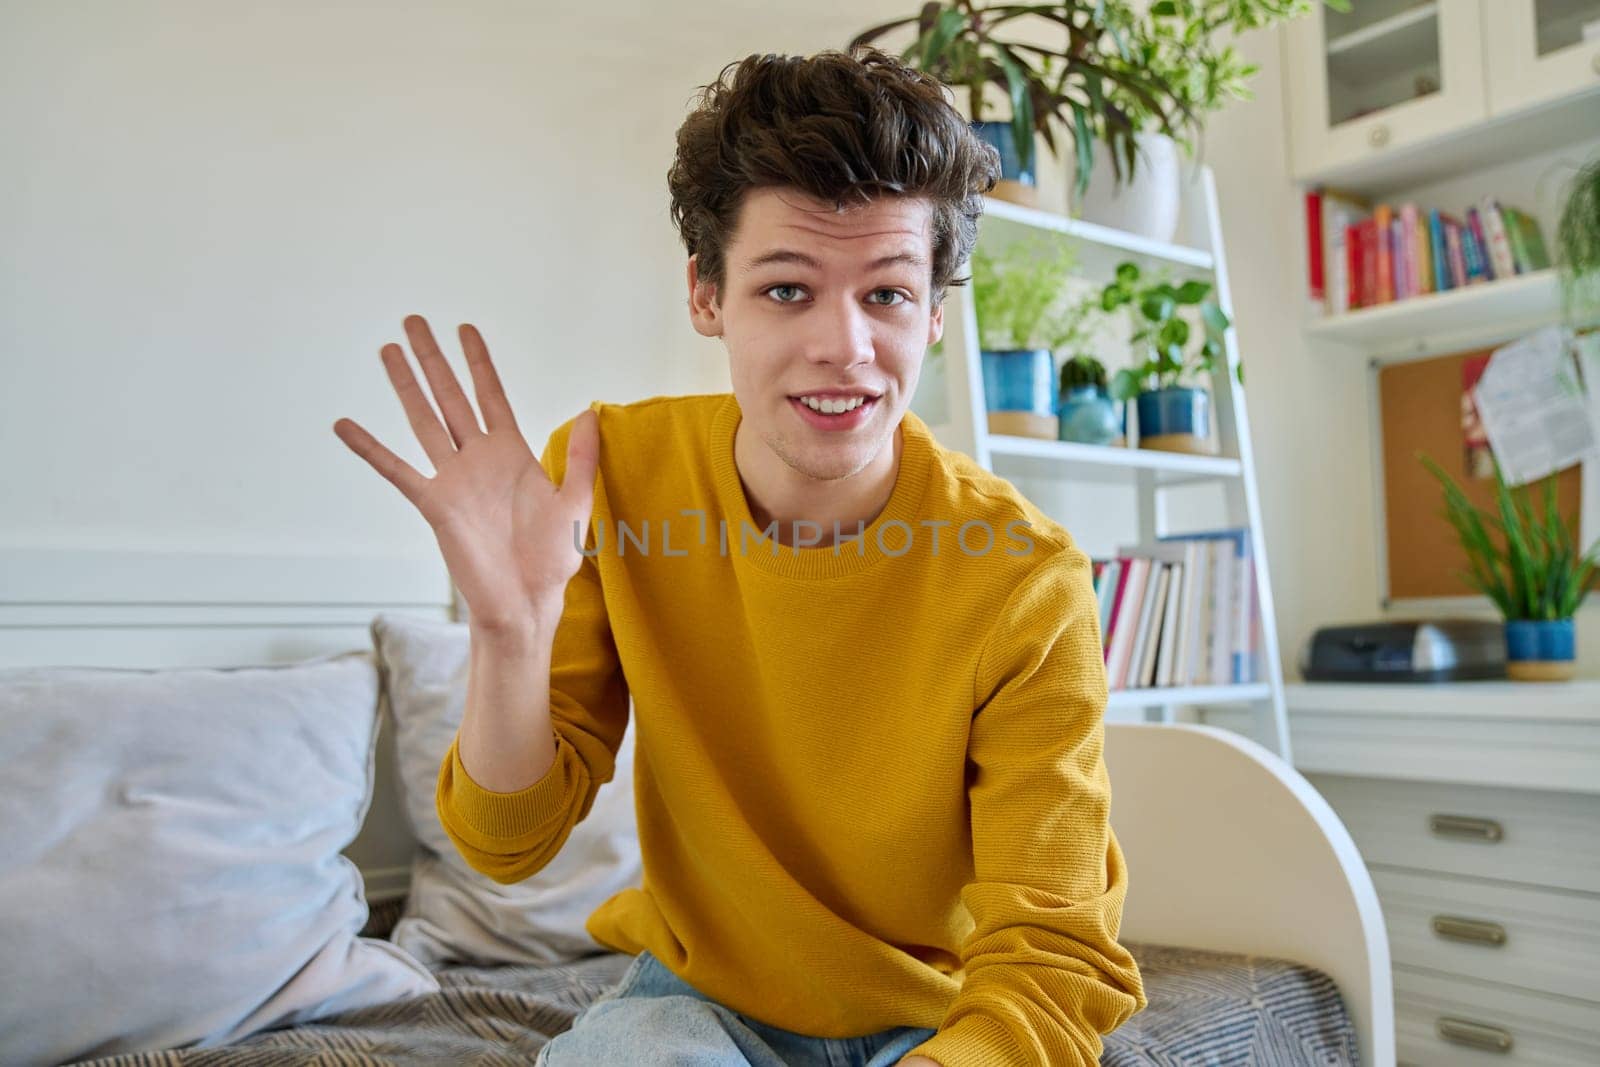 Web camera view of young guy 19-20 years old talking looking at camera in home by VH-studio